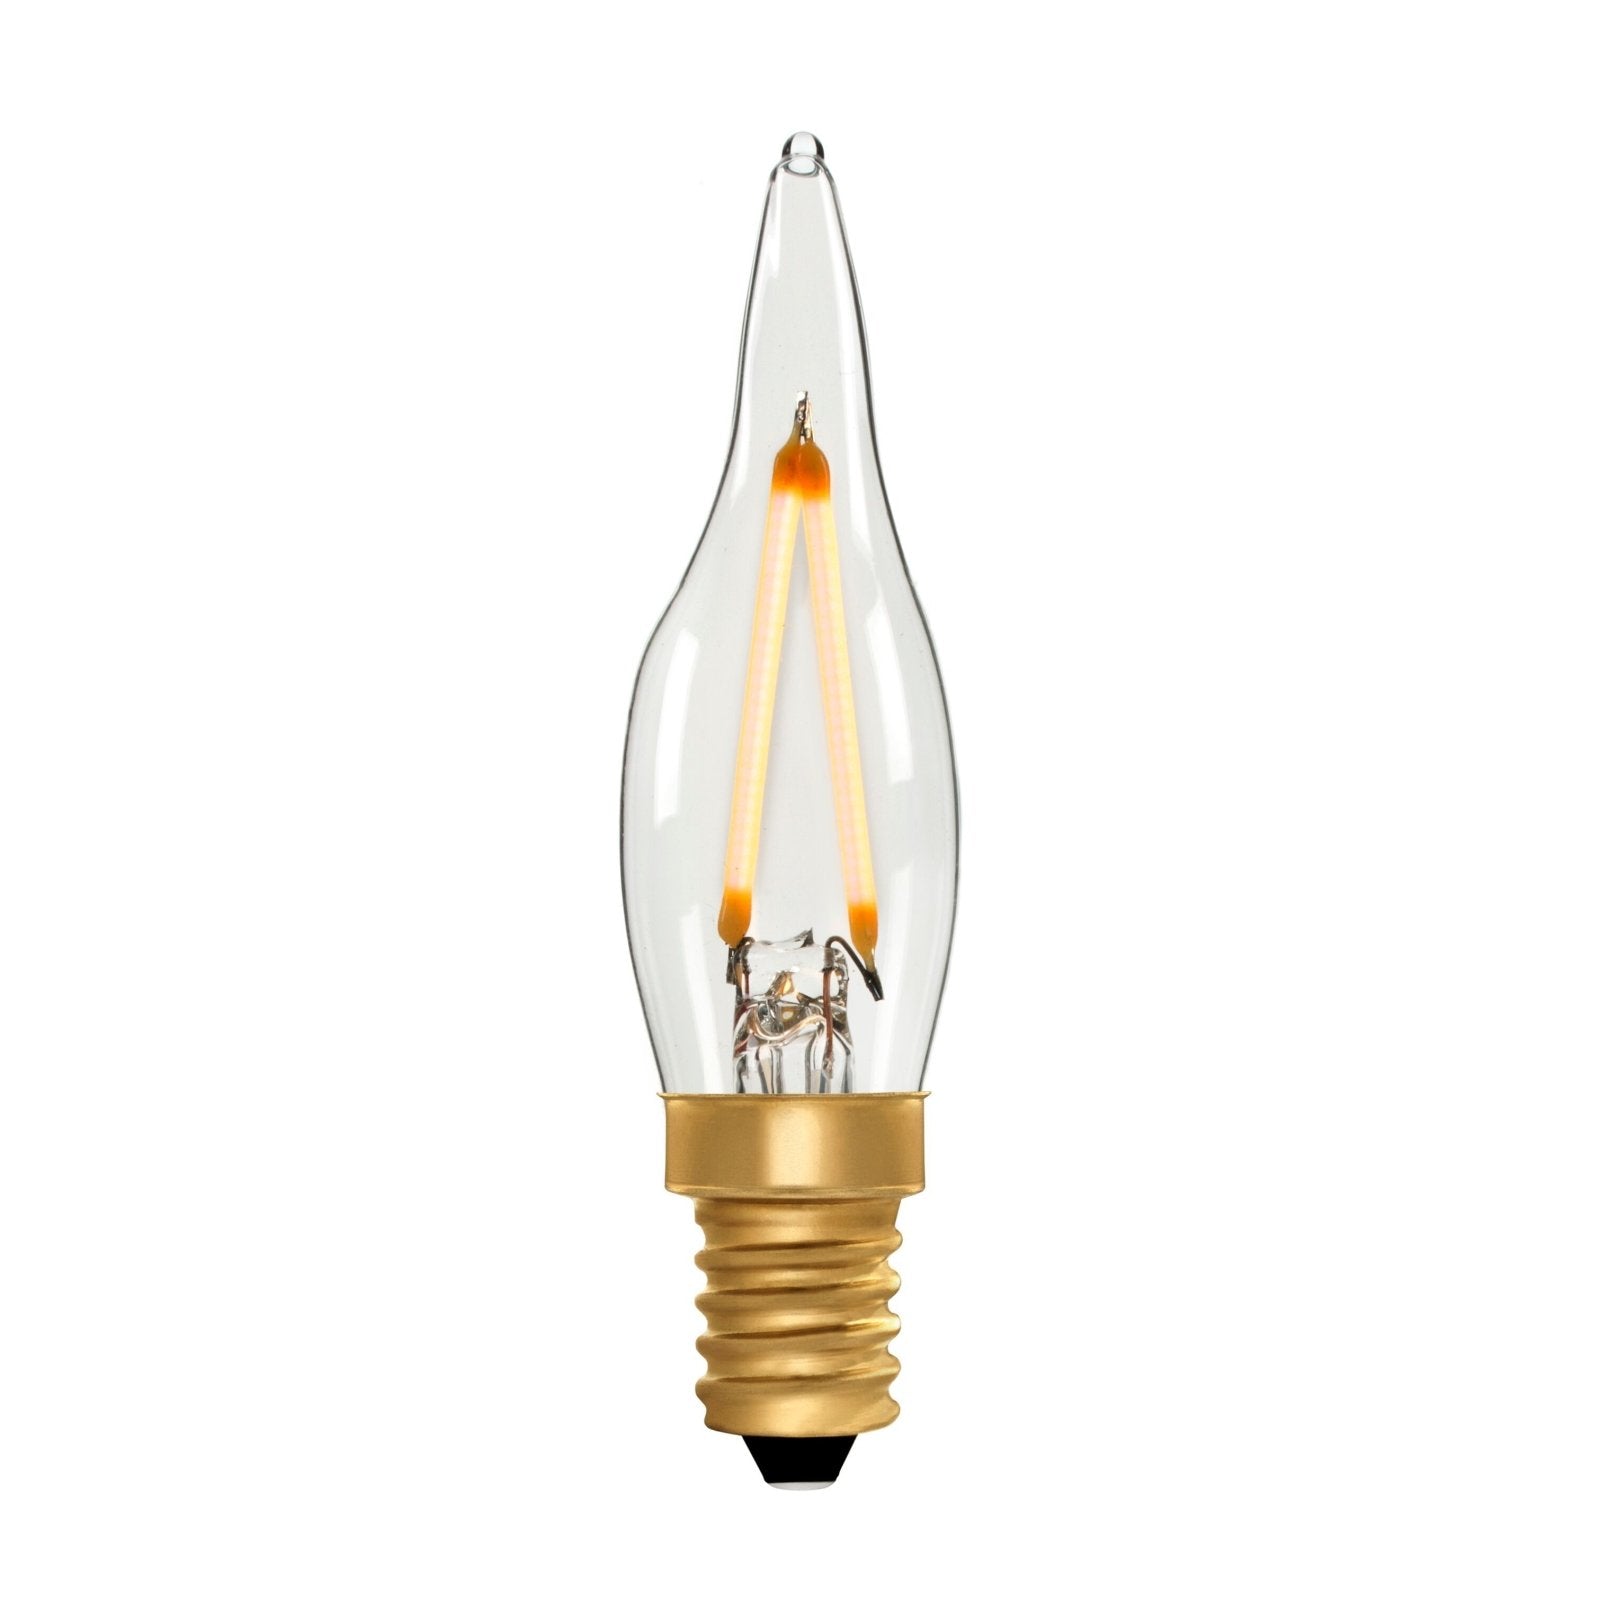 French Candle C22 Clear 1.5W E14 2200K - LED Lamp from RETROLIGHT. Made by Zico Lighting.